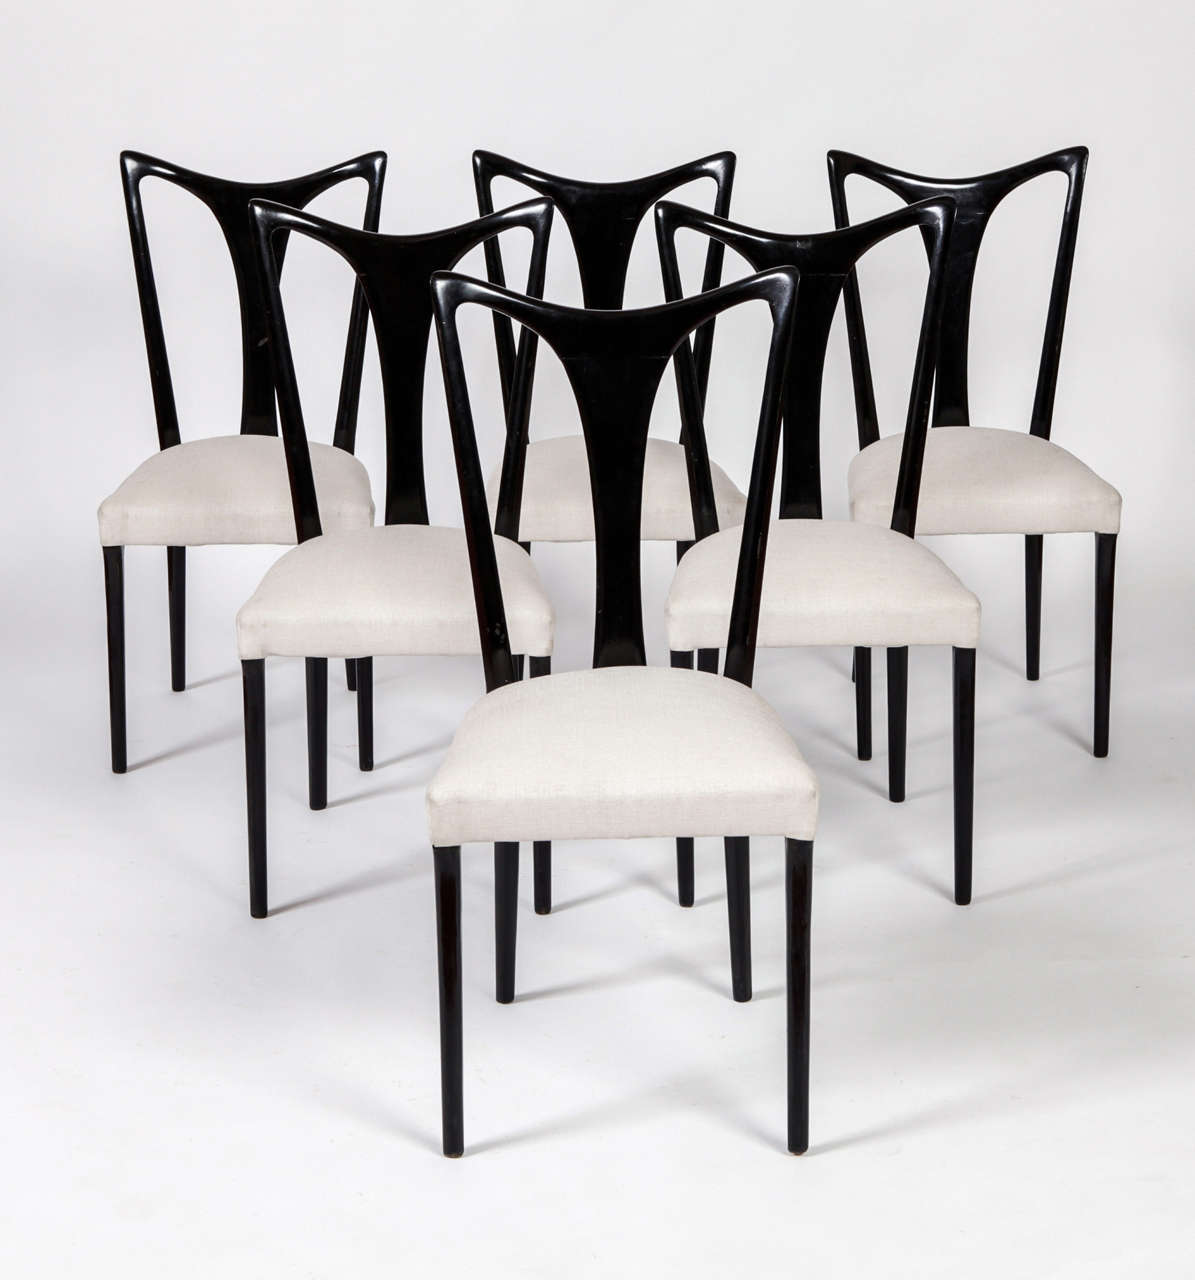 Important set of 6 dining chairs designed by Guglielmo ULRICH ;Black laquered mahogany and white cotton